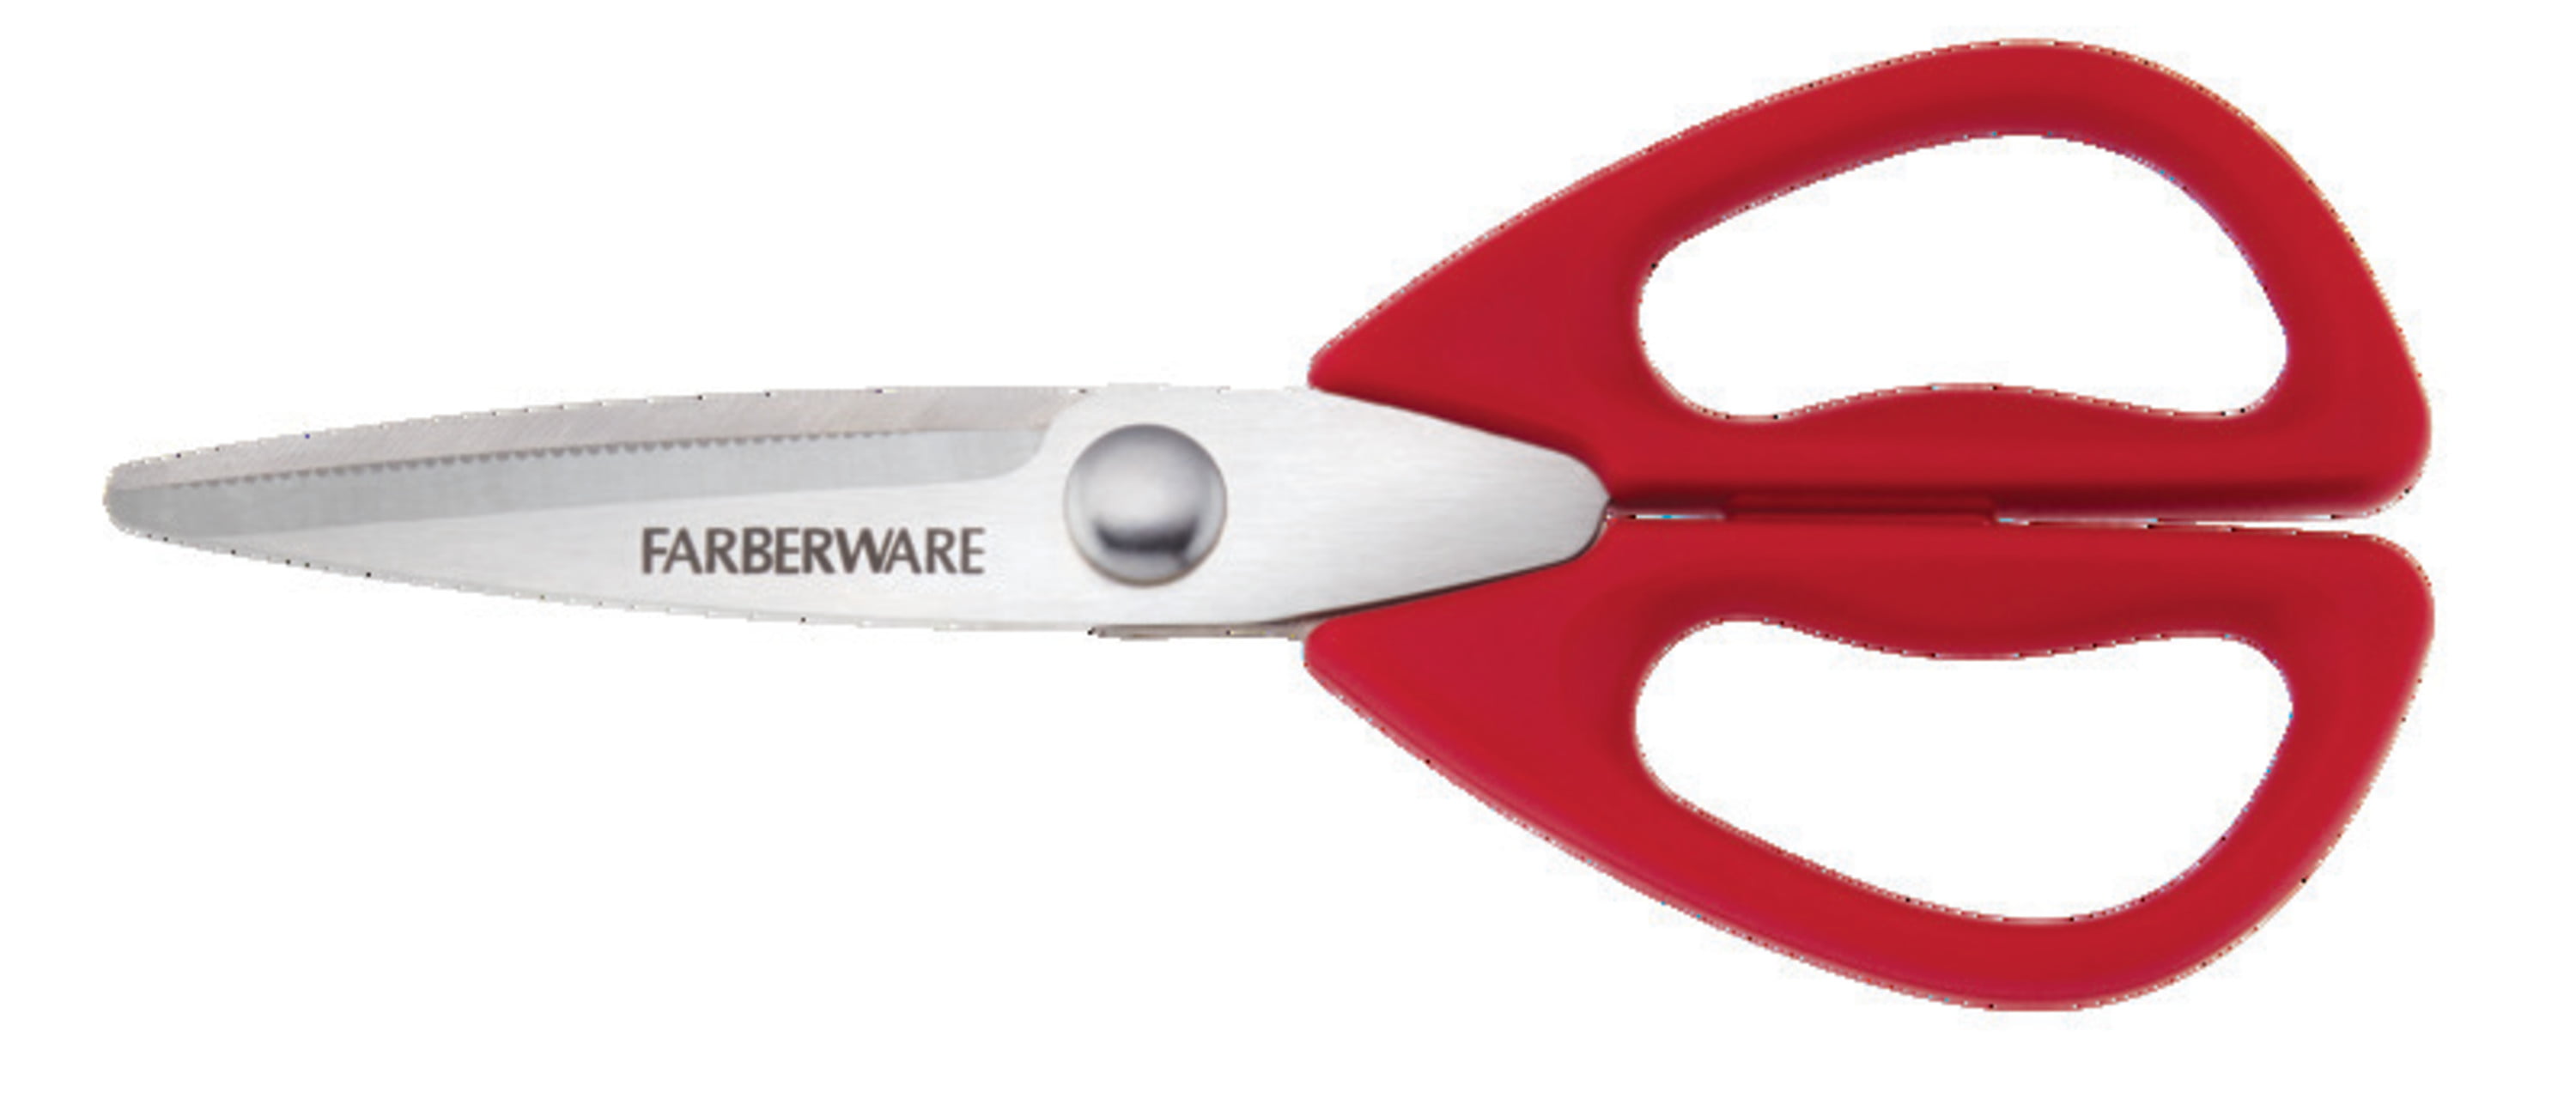 Farberware Edgekeeper 10 in 1 Scissors with Magnetic Holder in Red